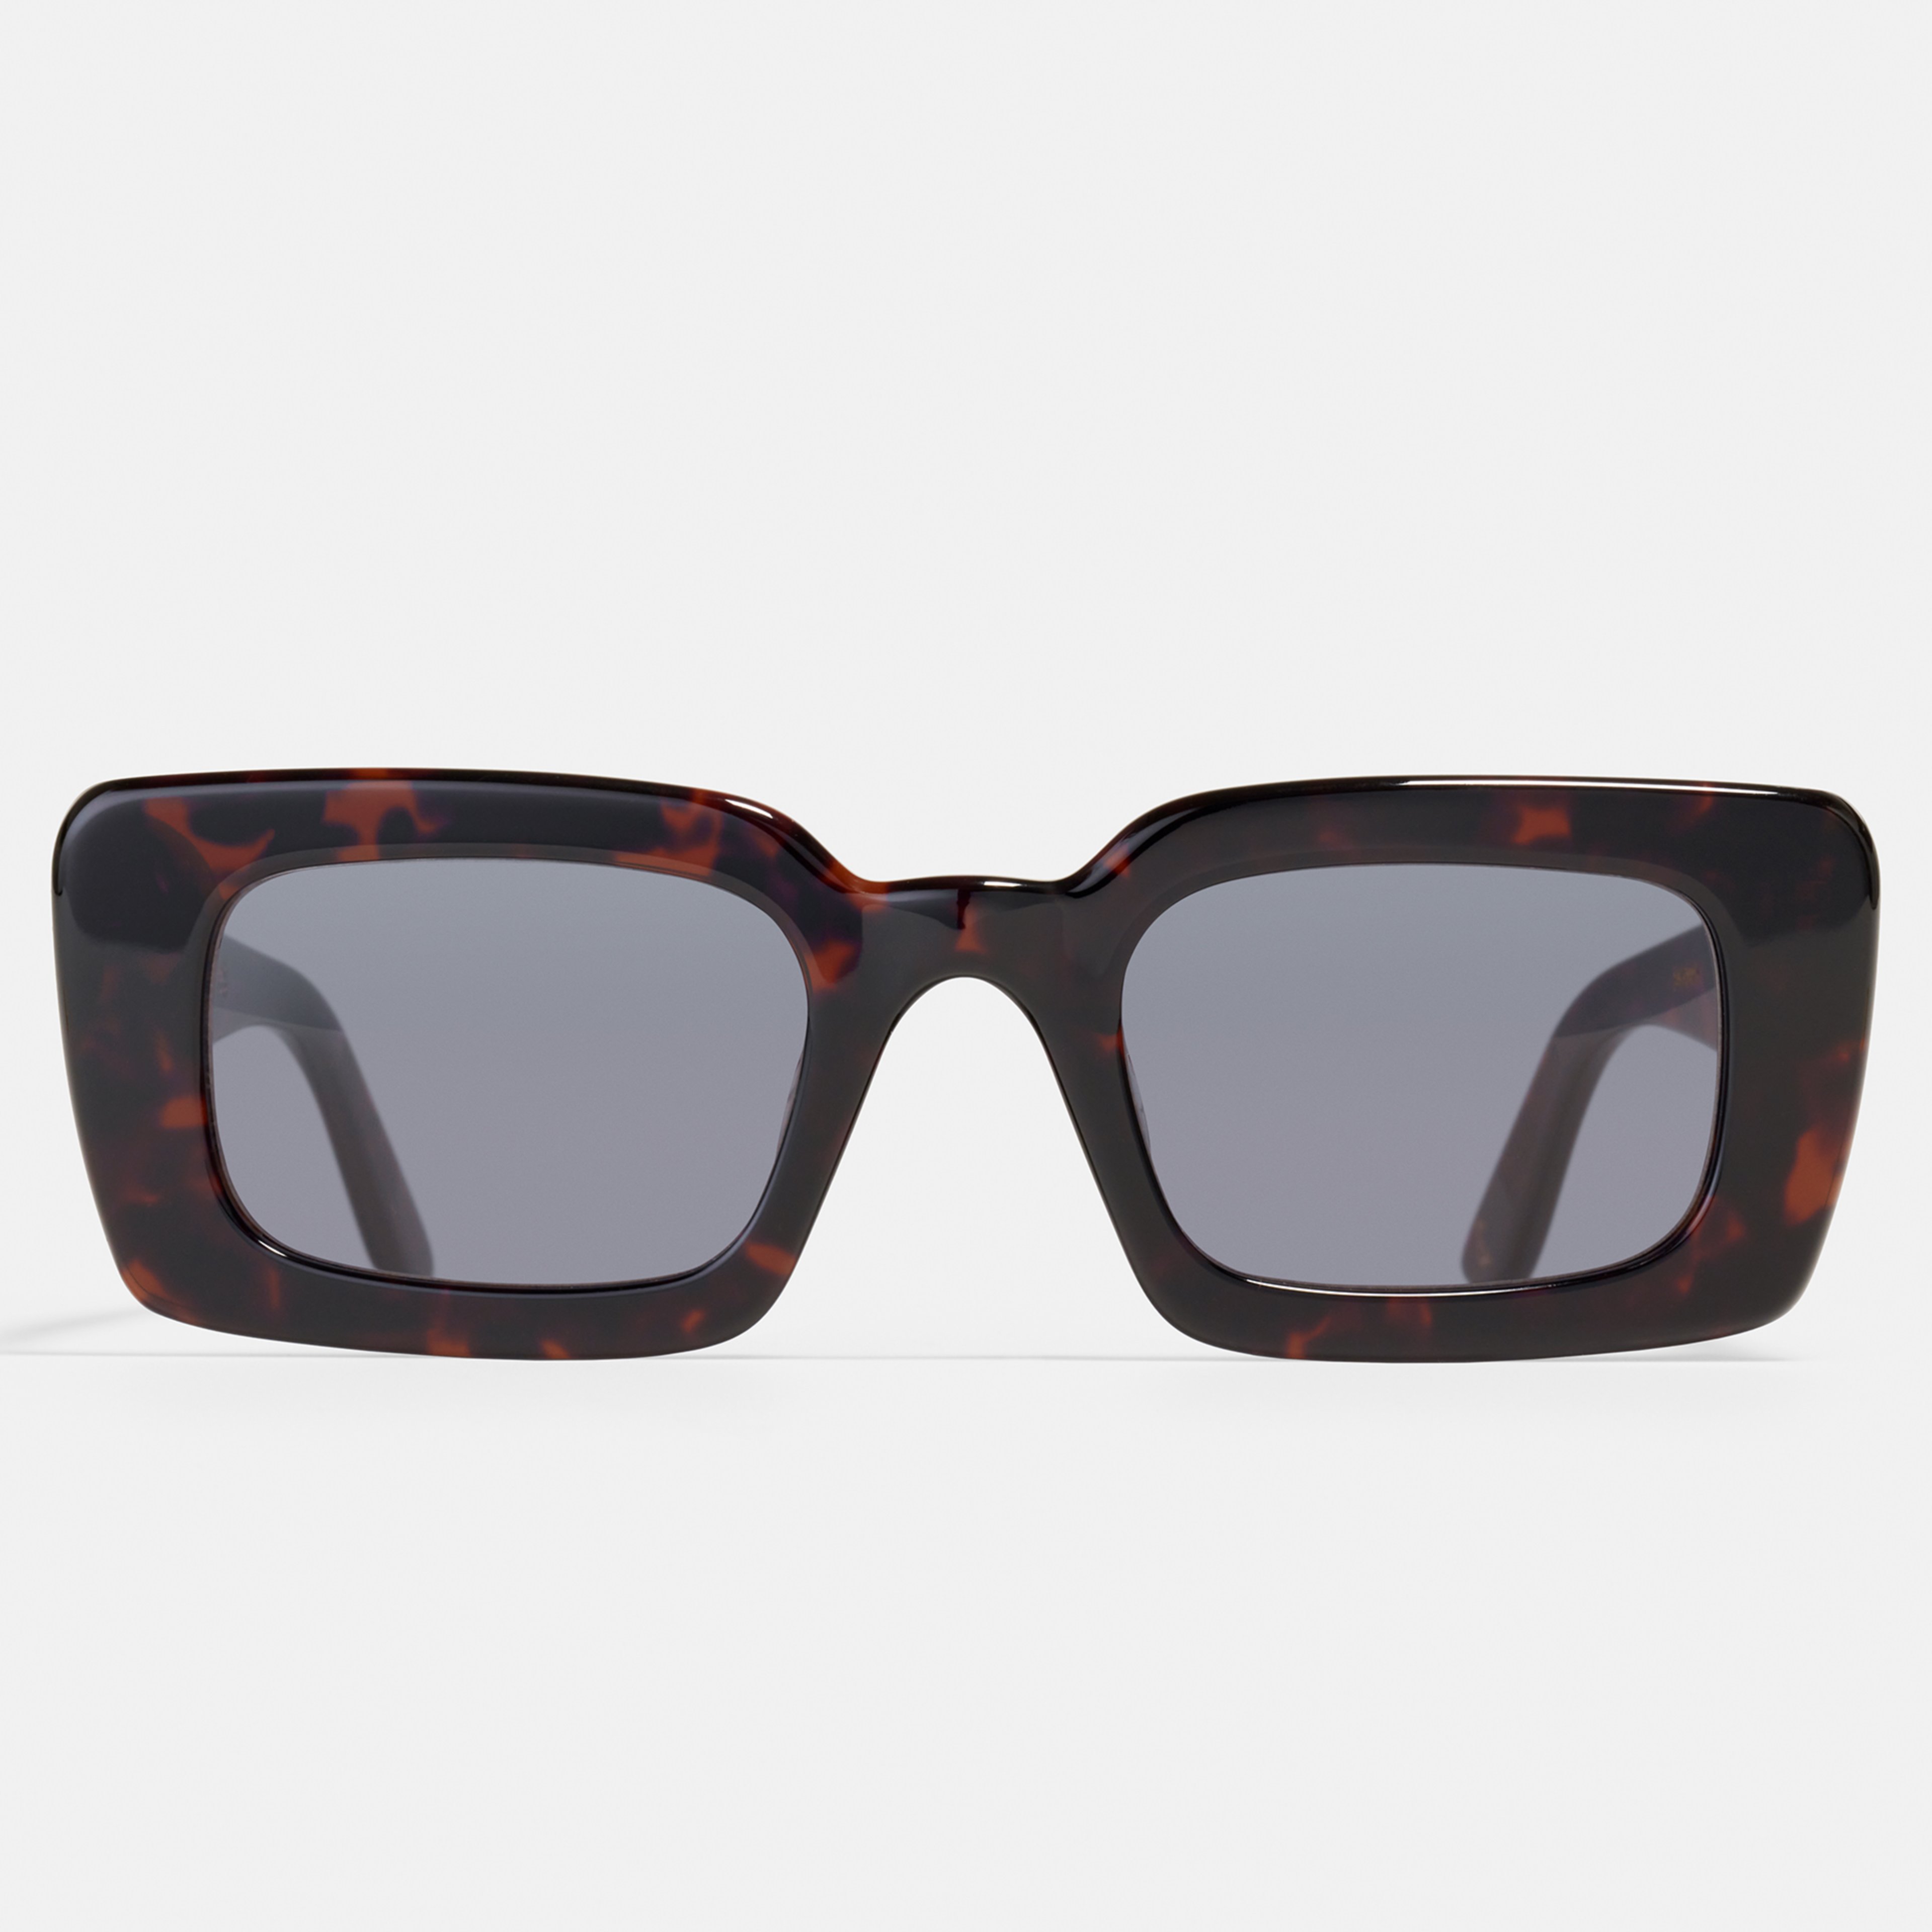 Ace & Tate Solaires | rectangulaire Acétate in tortoise